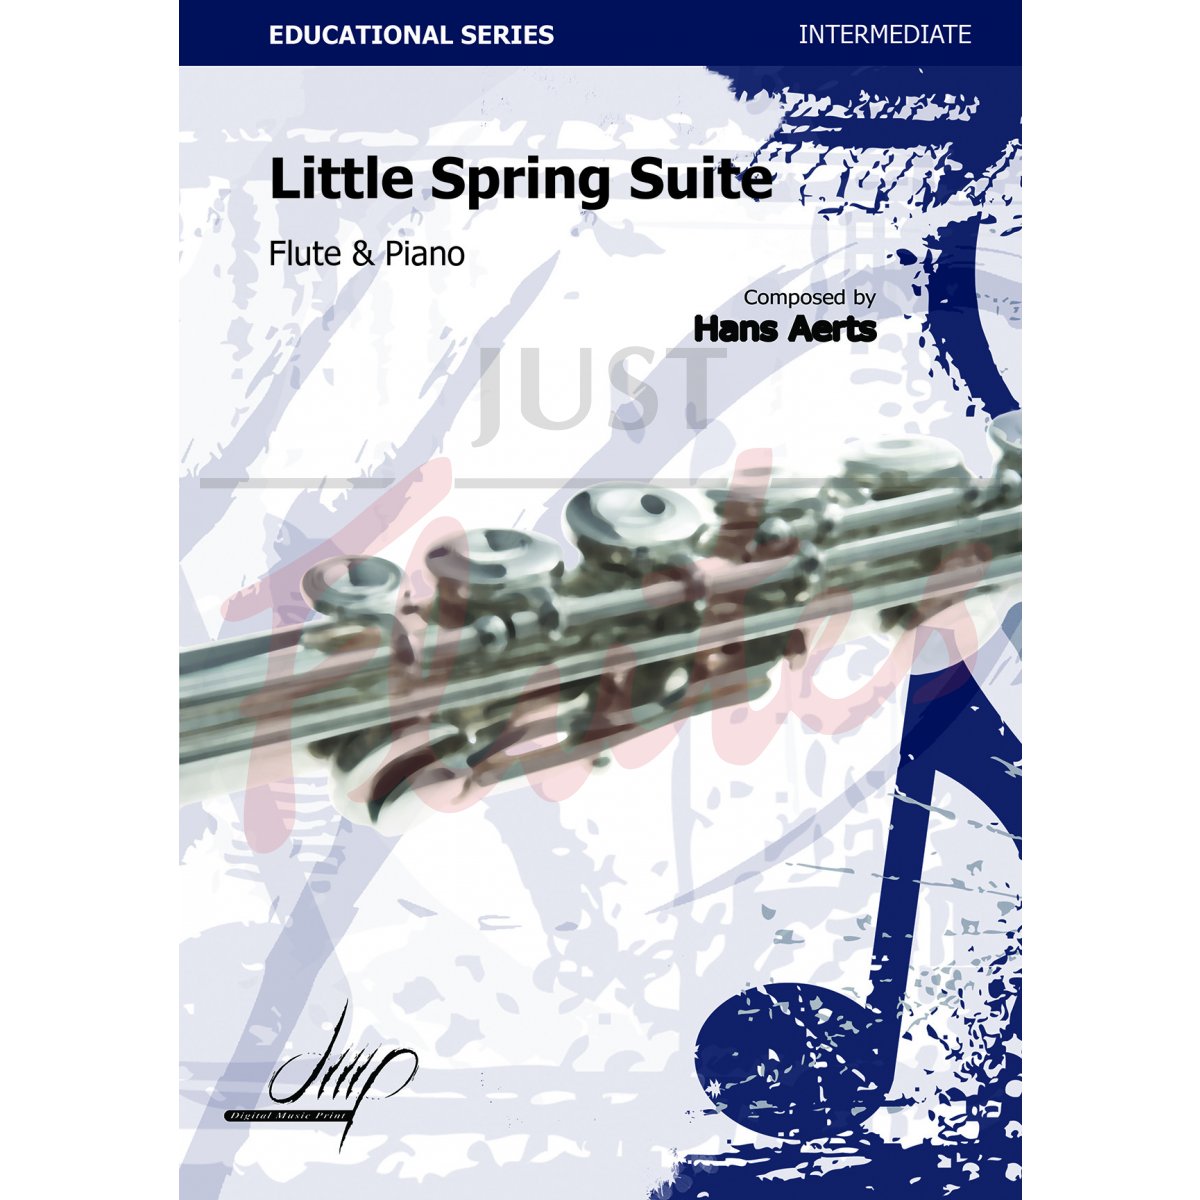 Little Spring Suite for Flute and Piano